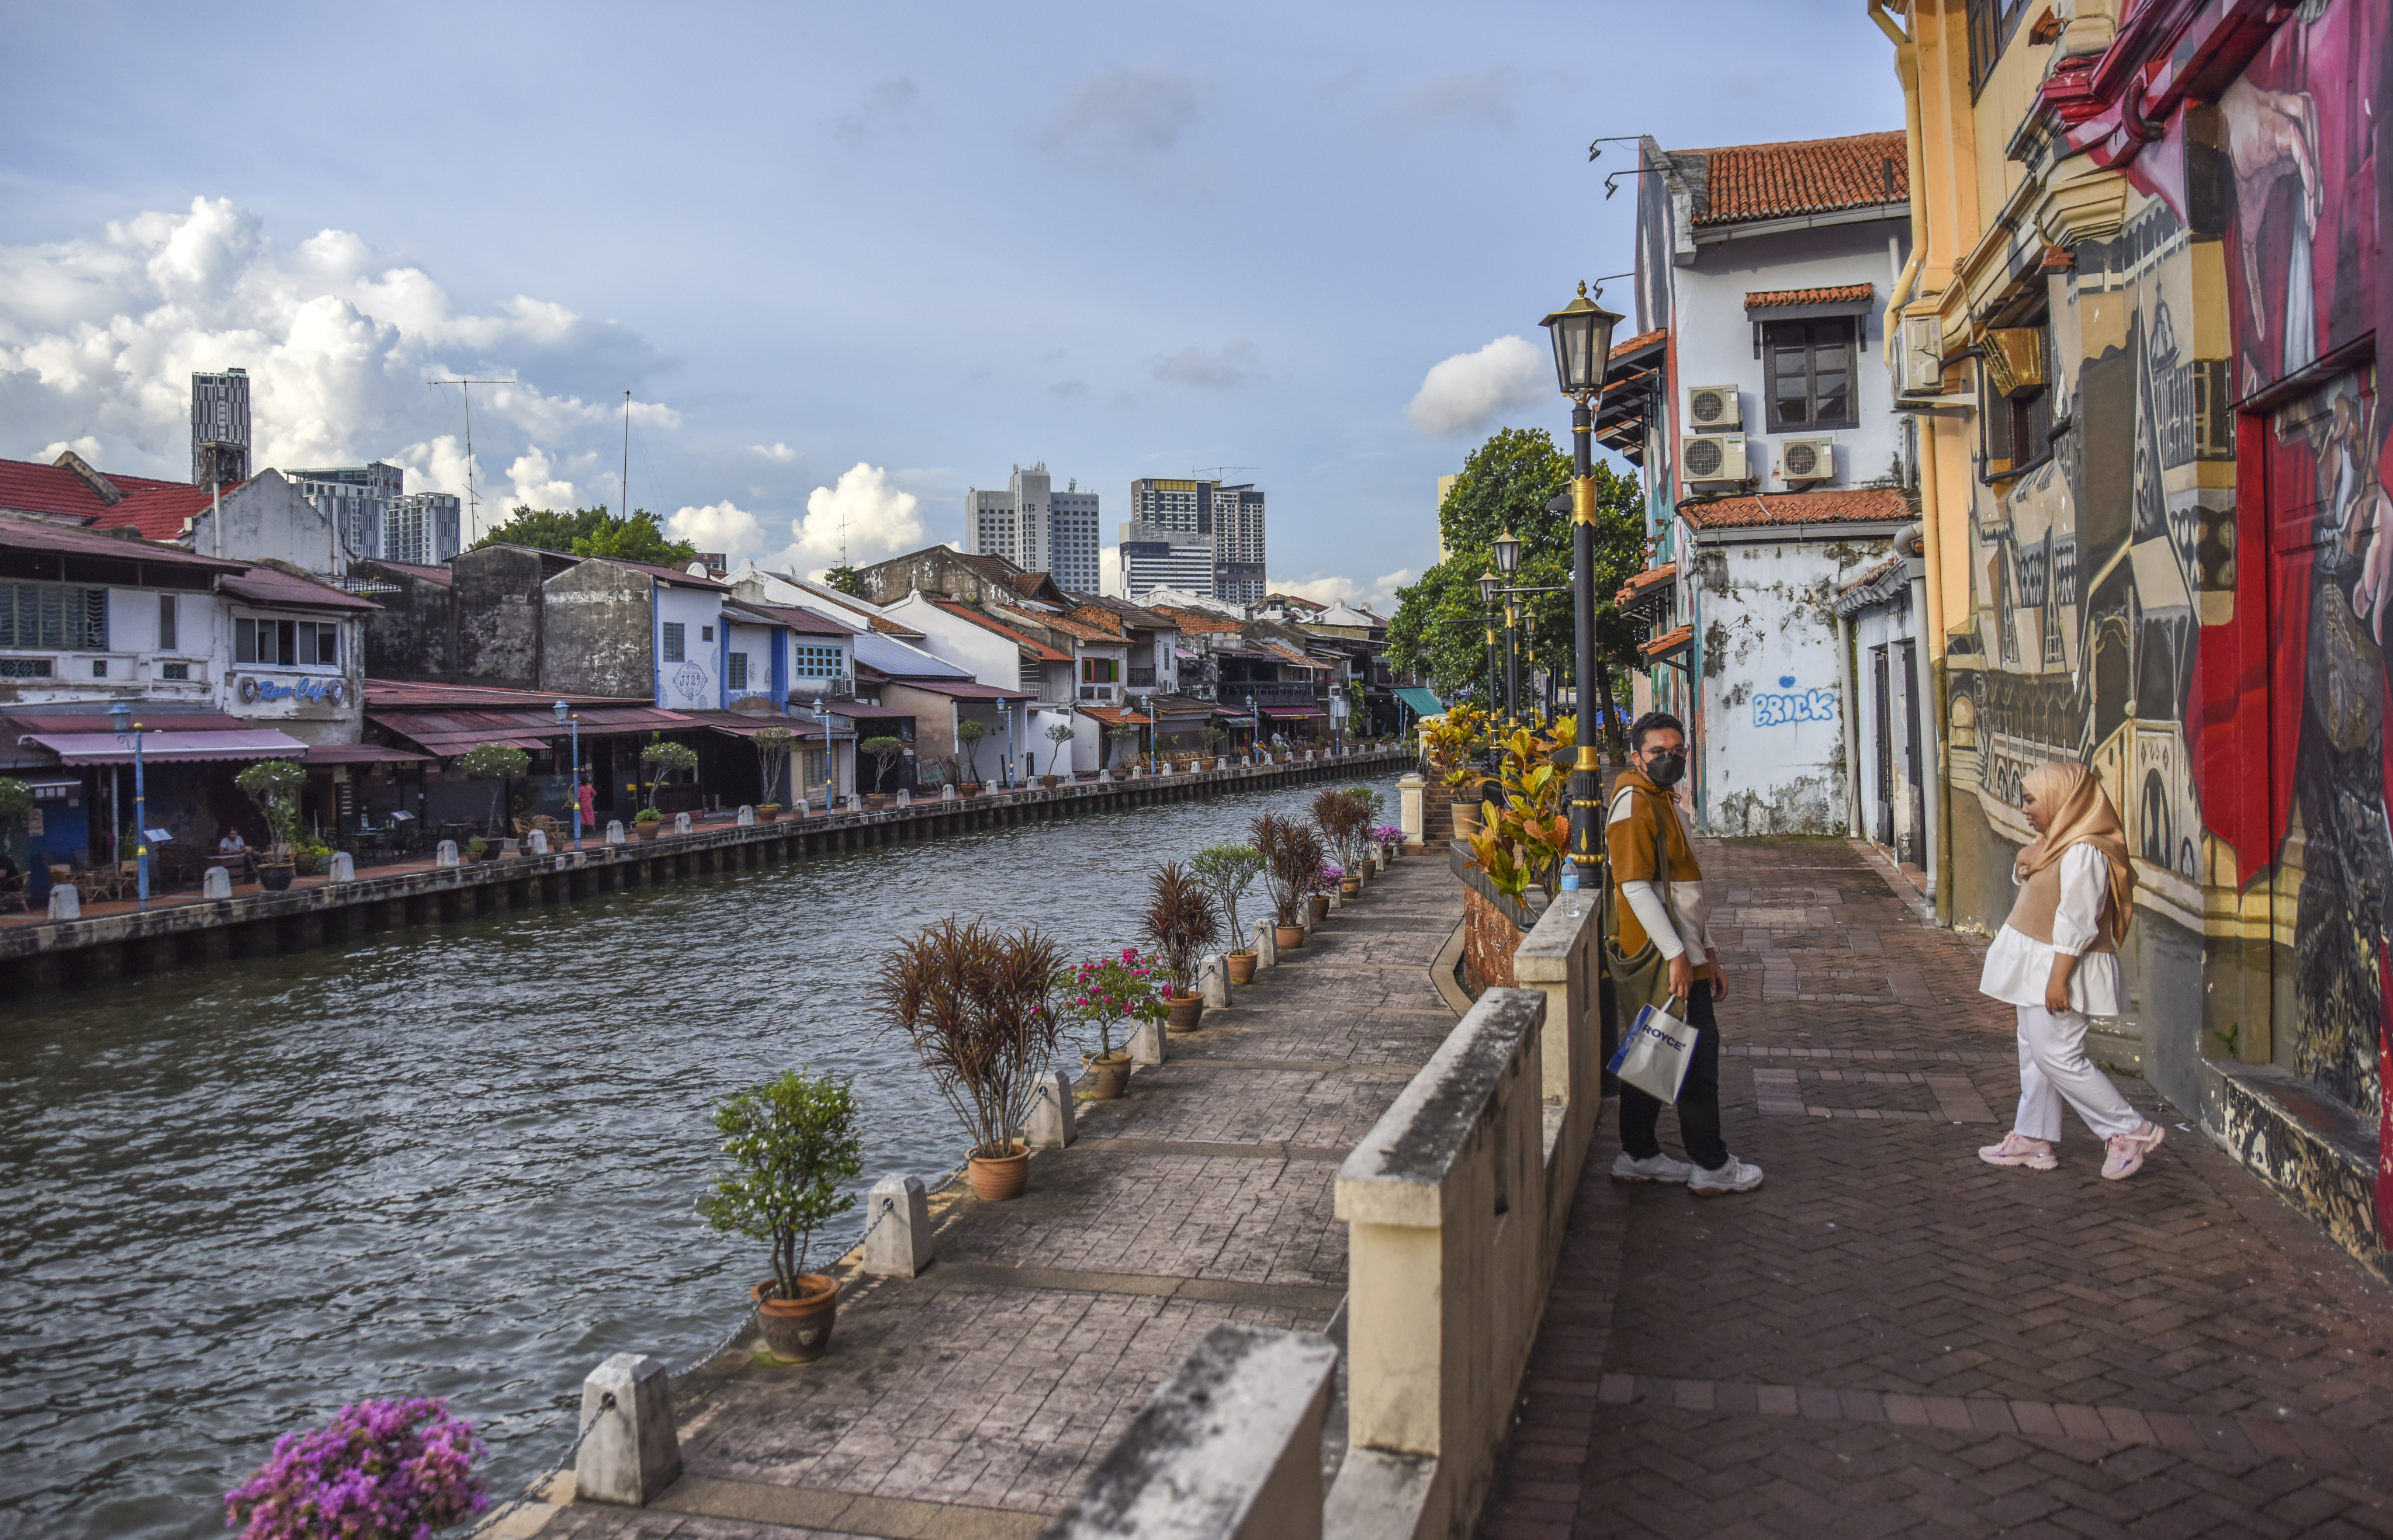 Malacca’s old town and the Malacca River. Look beyond its legacy of European colonisation to find its Chinese roots. Photo: Ronan O’Connell